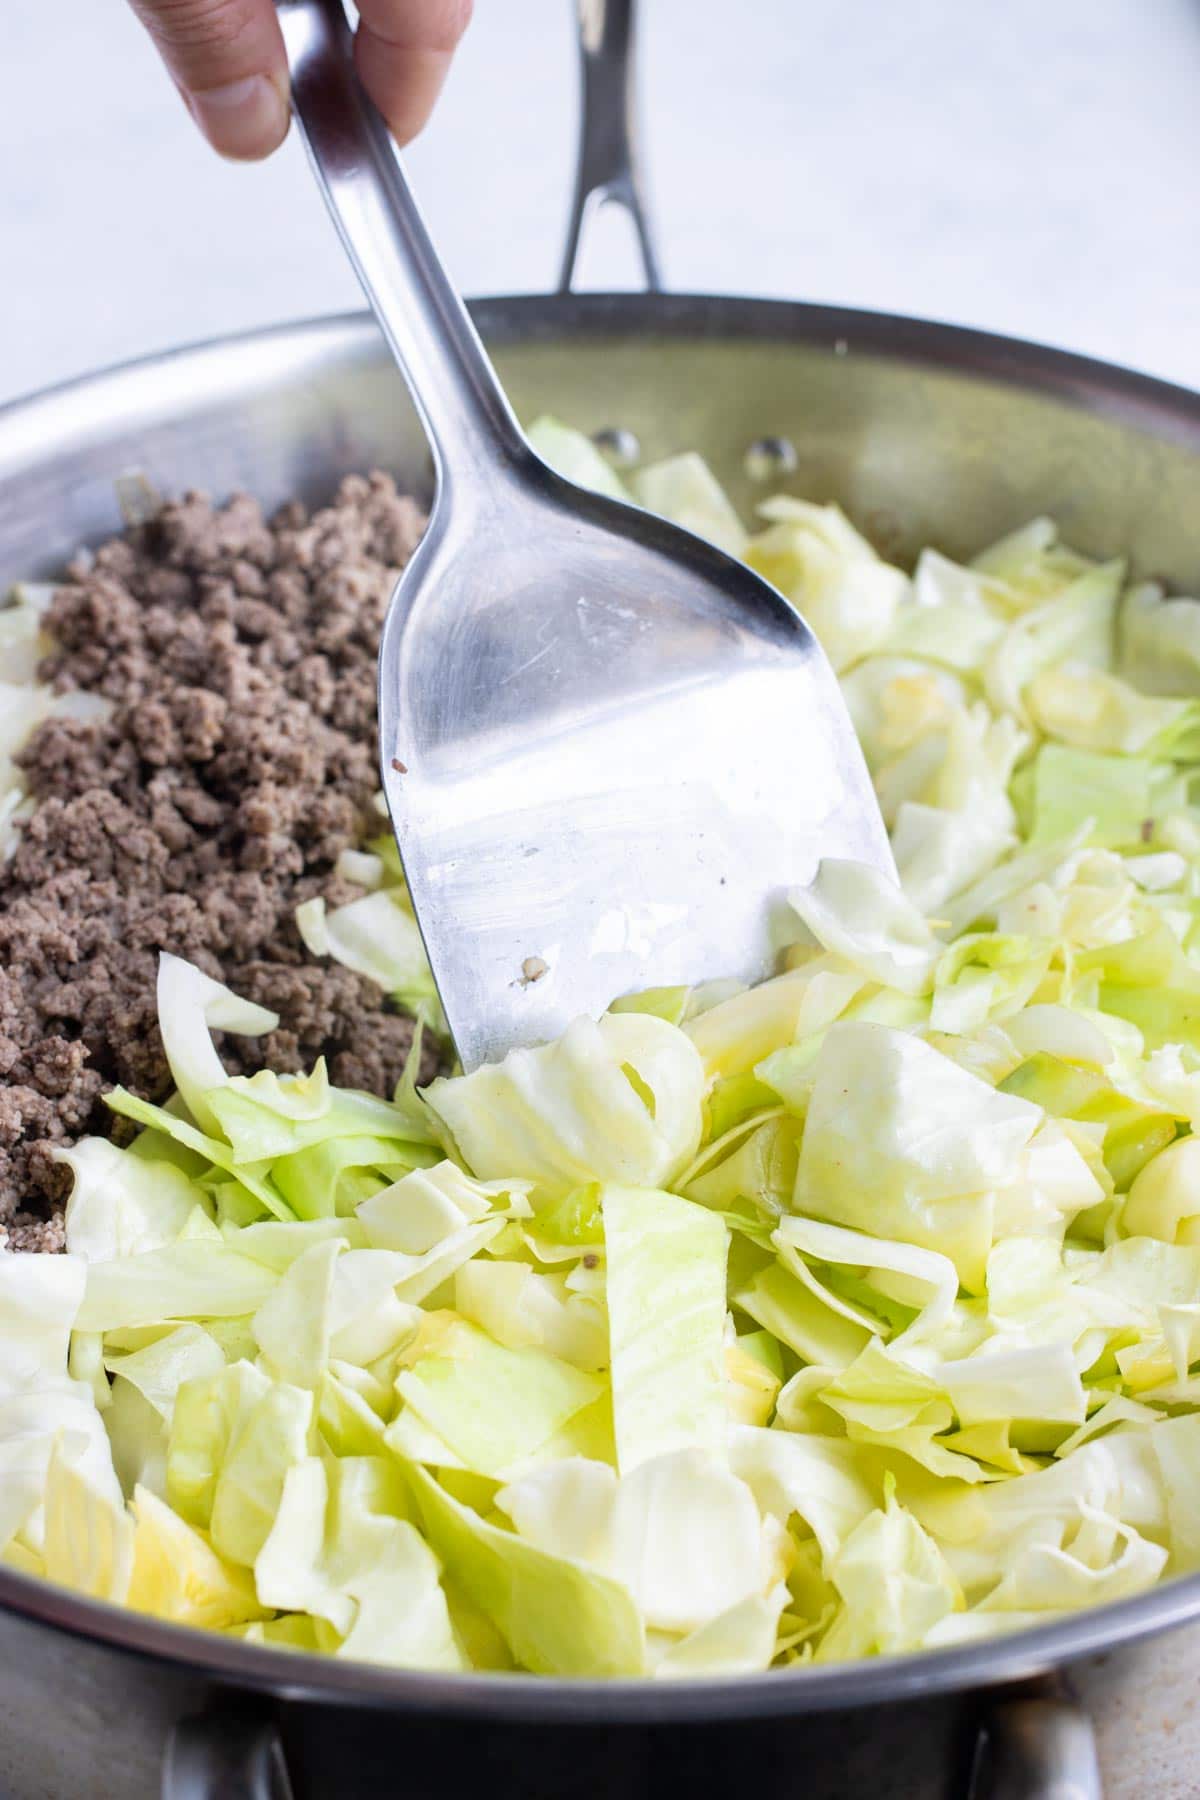 Cabbage is added to the cooked onions and ground beef.